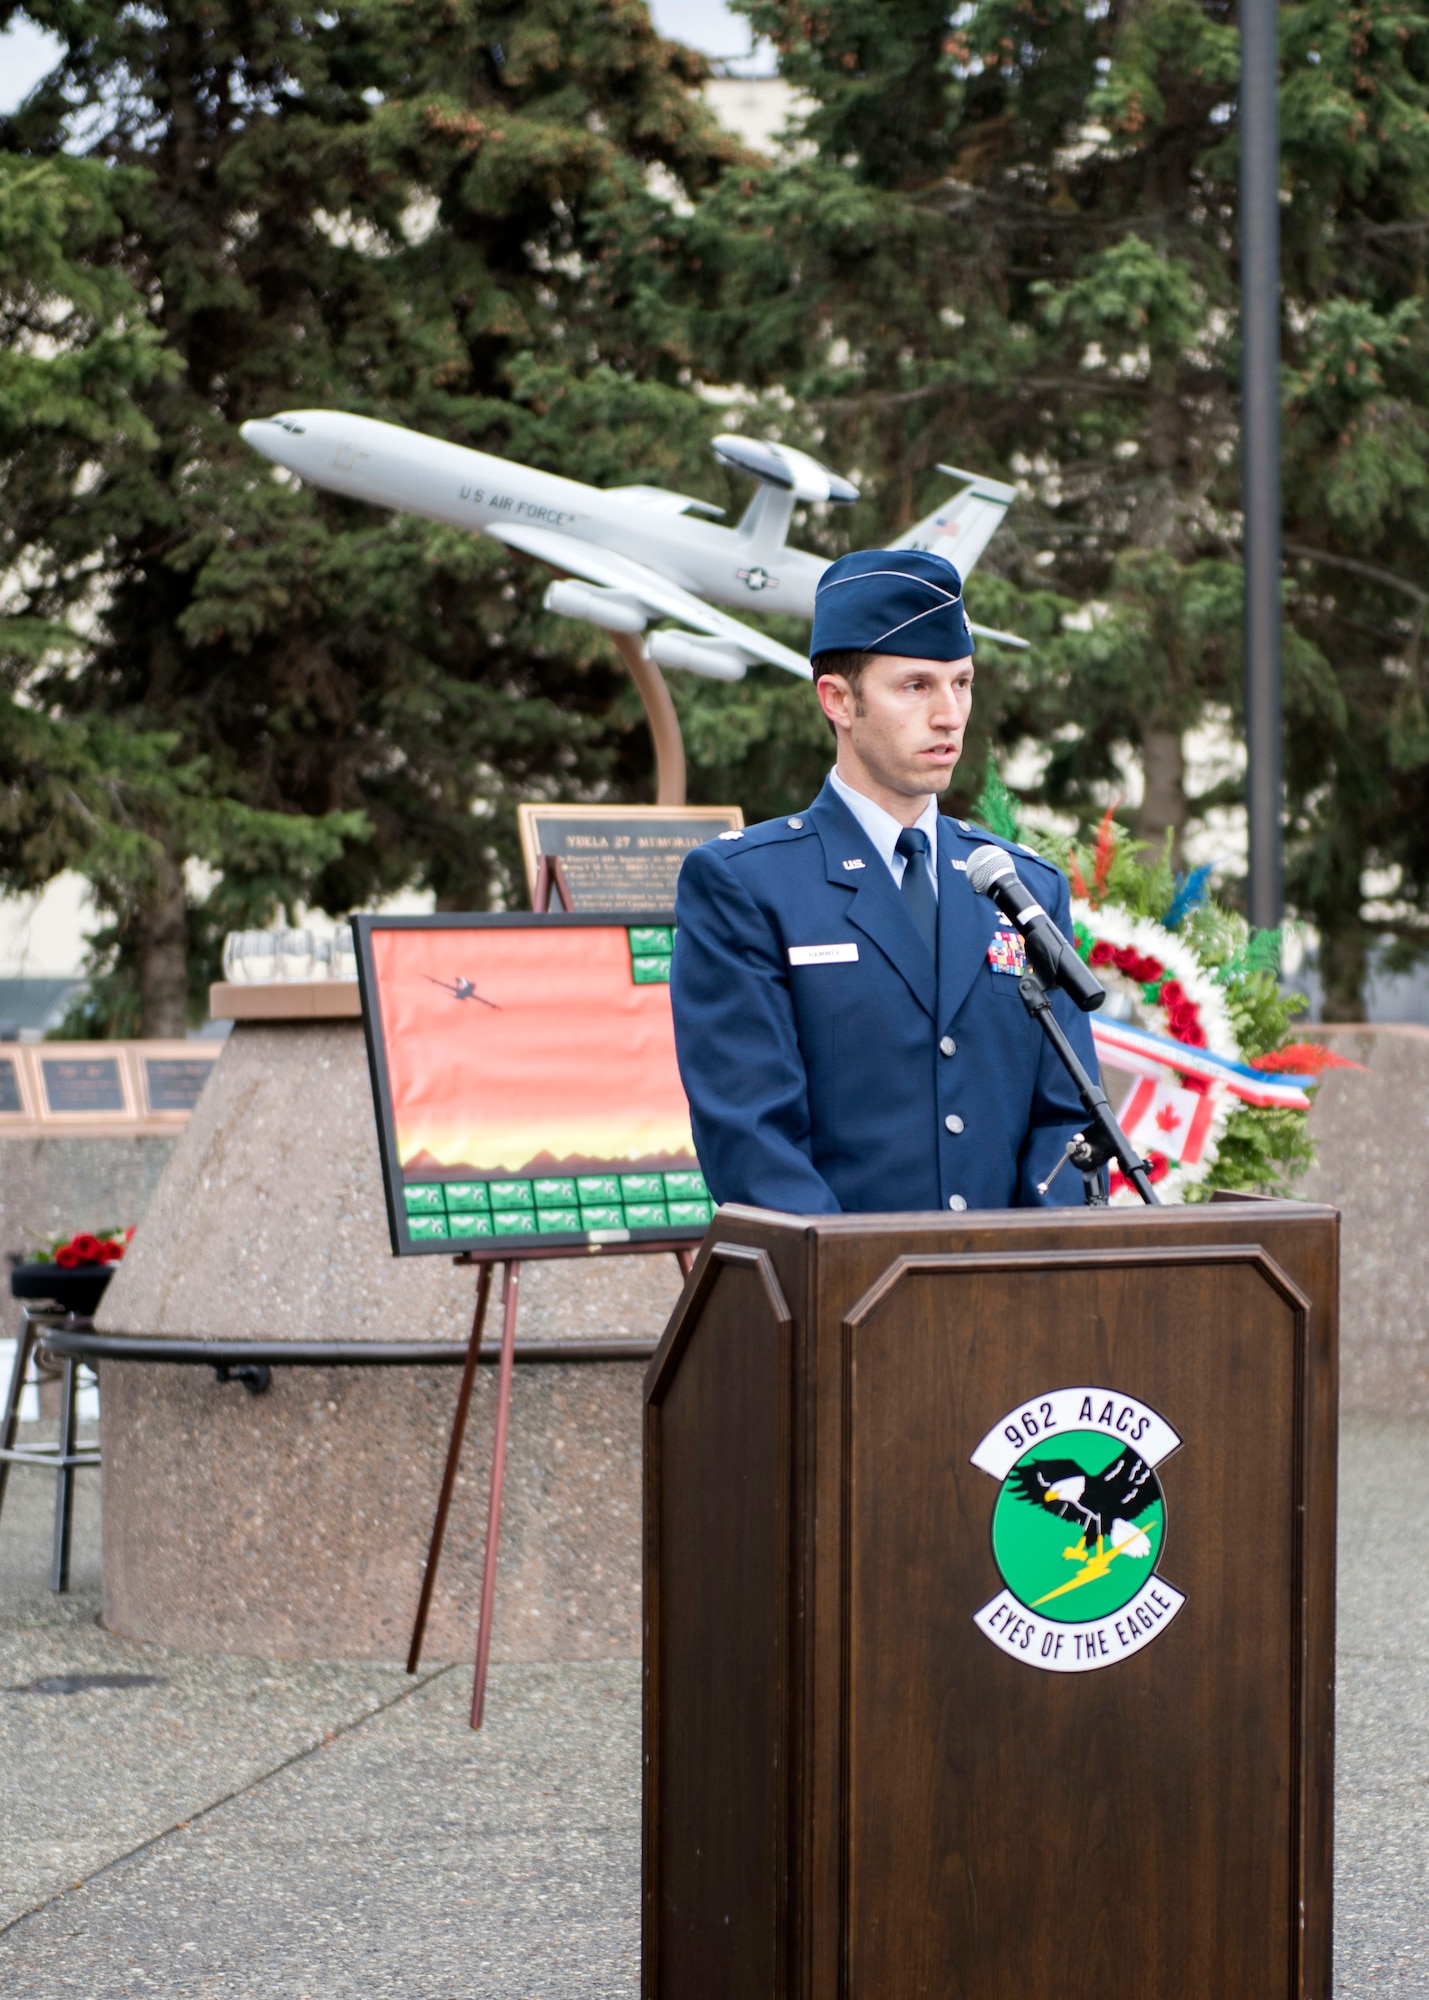 U.S. Air Force Lt. Col. Clint Hammer, 962nd Airborne Air Control Squadron director of operations, speaks at the Yukla 27 25th anniversary memorial ceremony at Joint Base Elmendorf-Richardson, Alaska, Sept. 22, 2020. Yukla 27, a U.S. Air Force E-3 Sentry airborne warning and control system aircraft assigned to the 962nd AACS, encountered a flock of geese Sept. 22, 1995, and crashed shortly after takeoff on a routine surveillance training sortie, killing all 24 Canadian and U.S. Airmen aboard.